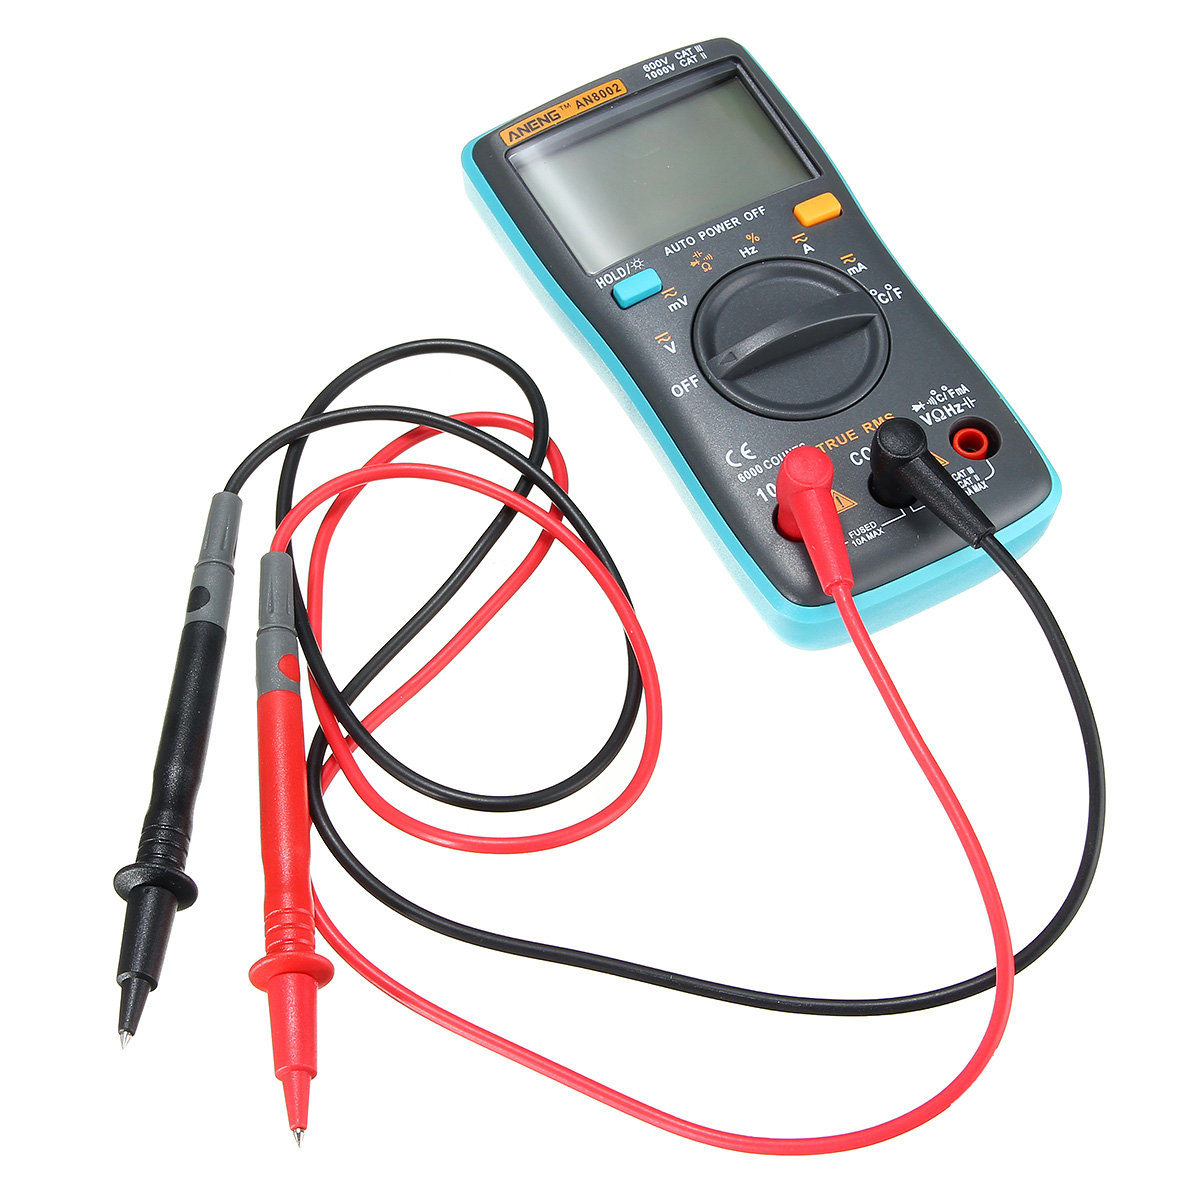 ANENG AN8002 Digital True RMS 6000 Counts Multimeter AC/DC Current Voltage Frequency Resistance Temperature Tester ℃/℉ 17